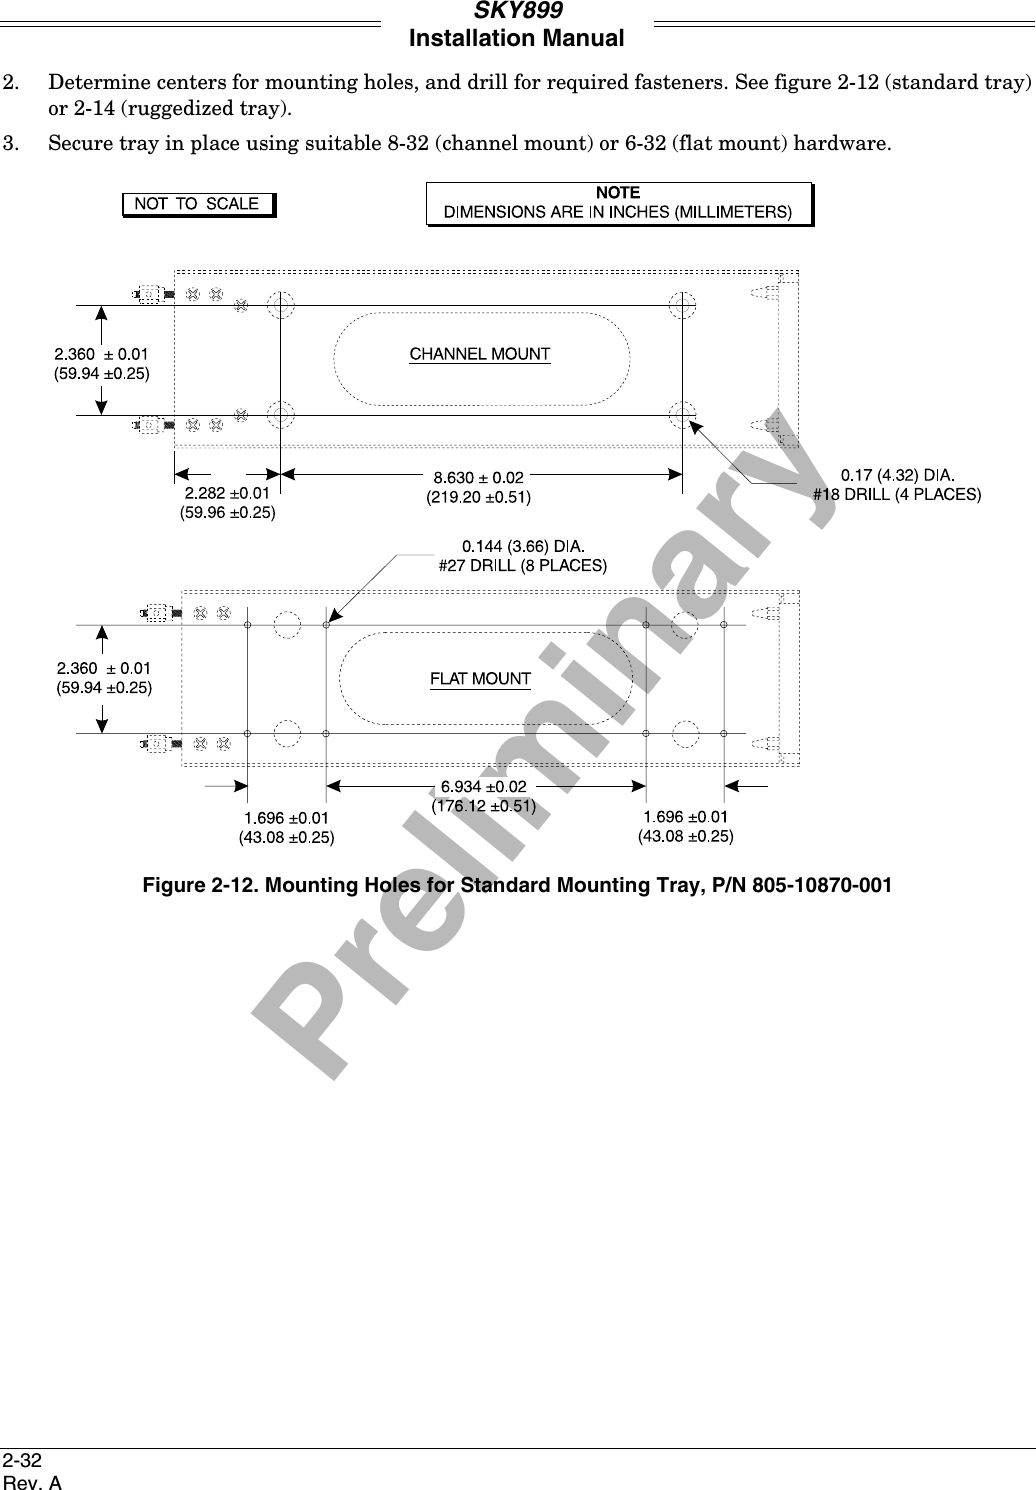 PreliminarySKY899Installation Manual2-32Rev. A2. Determine centers for mounting holes, and drill for required fasteners. See figure 2-12 (standard tray)or 2-14 (ruggedized tray).3. Secure tray in place using suitable 8-32 (channel mount) or 6-32 (flat mount) hardware.Figure 2-12. Mounting Holes for Standard Mounting Tray, P/N 805-10870-001